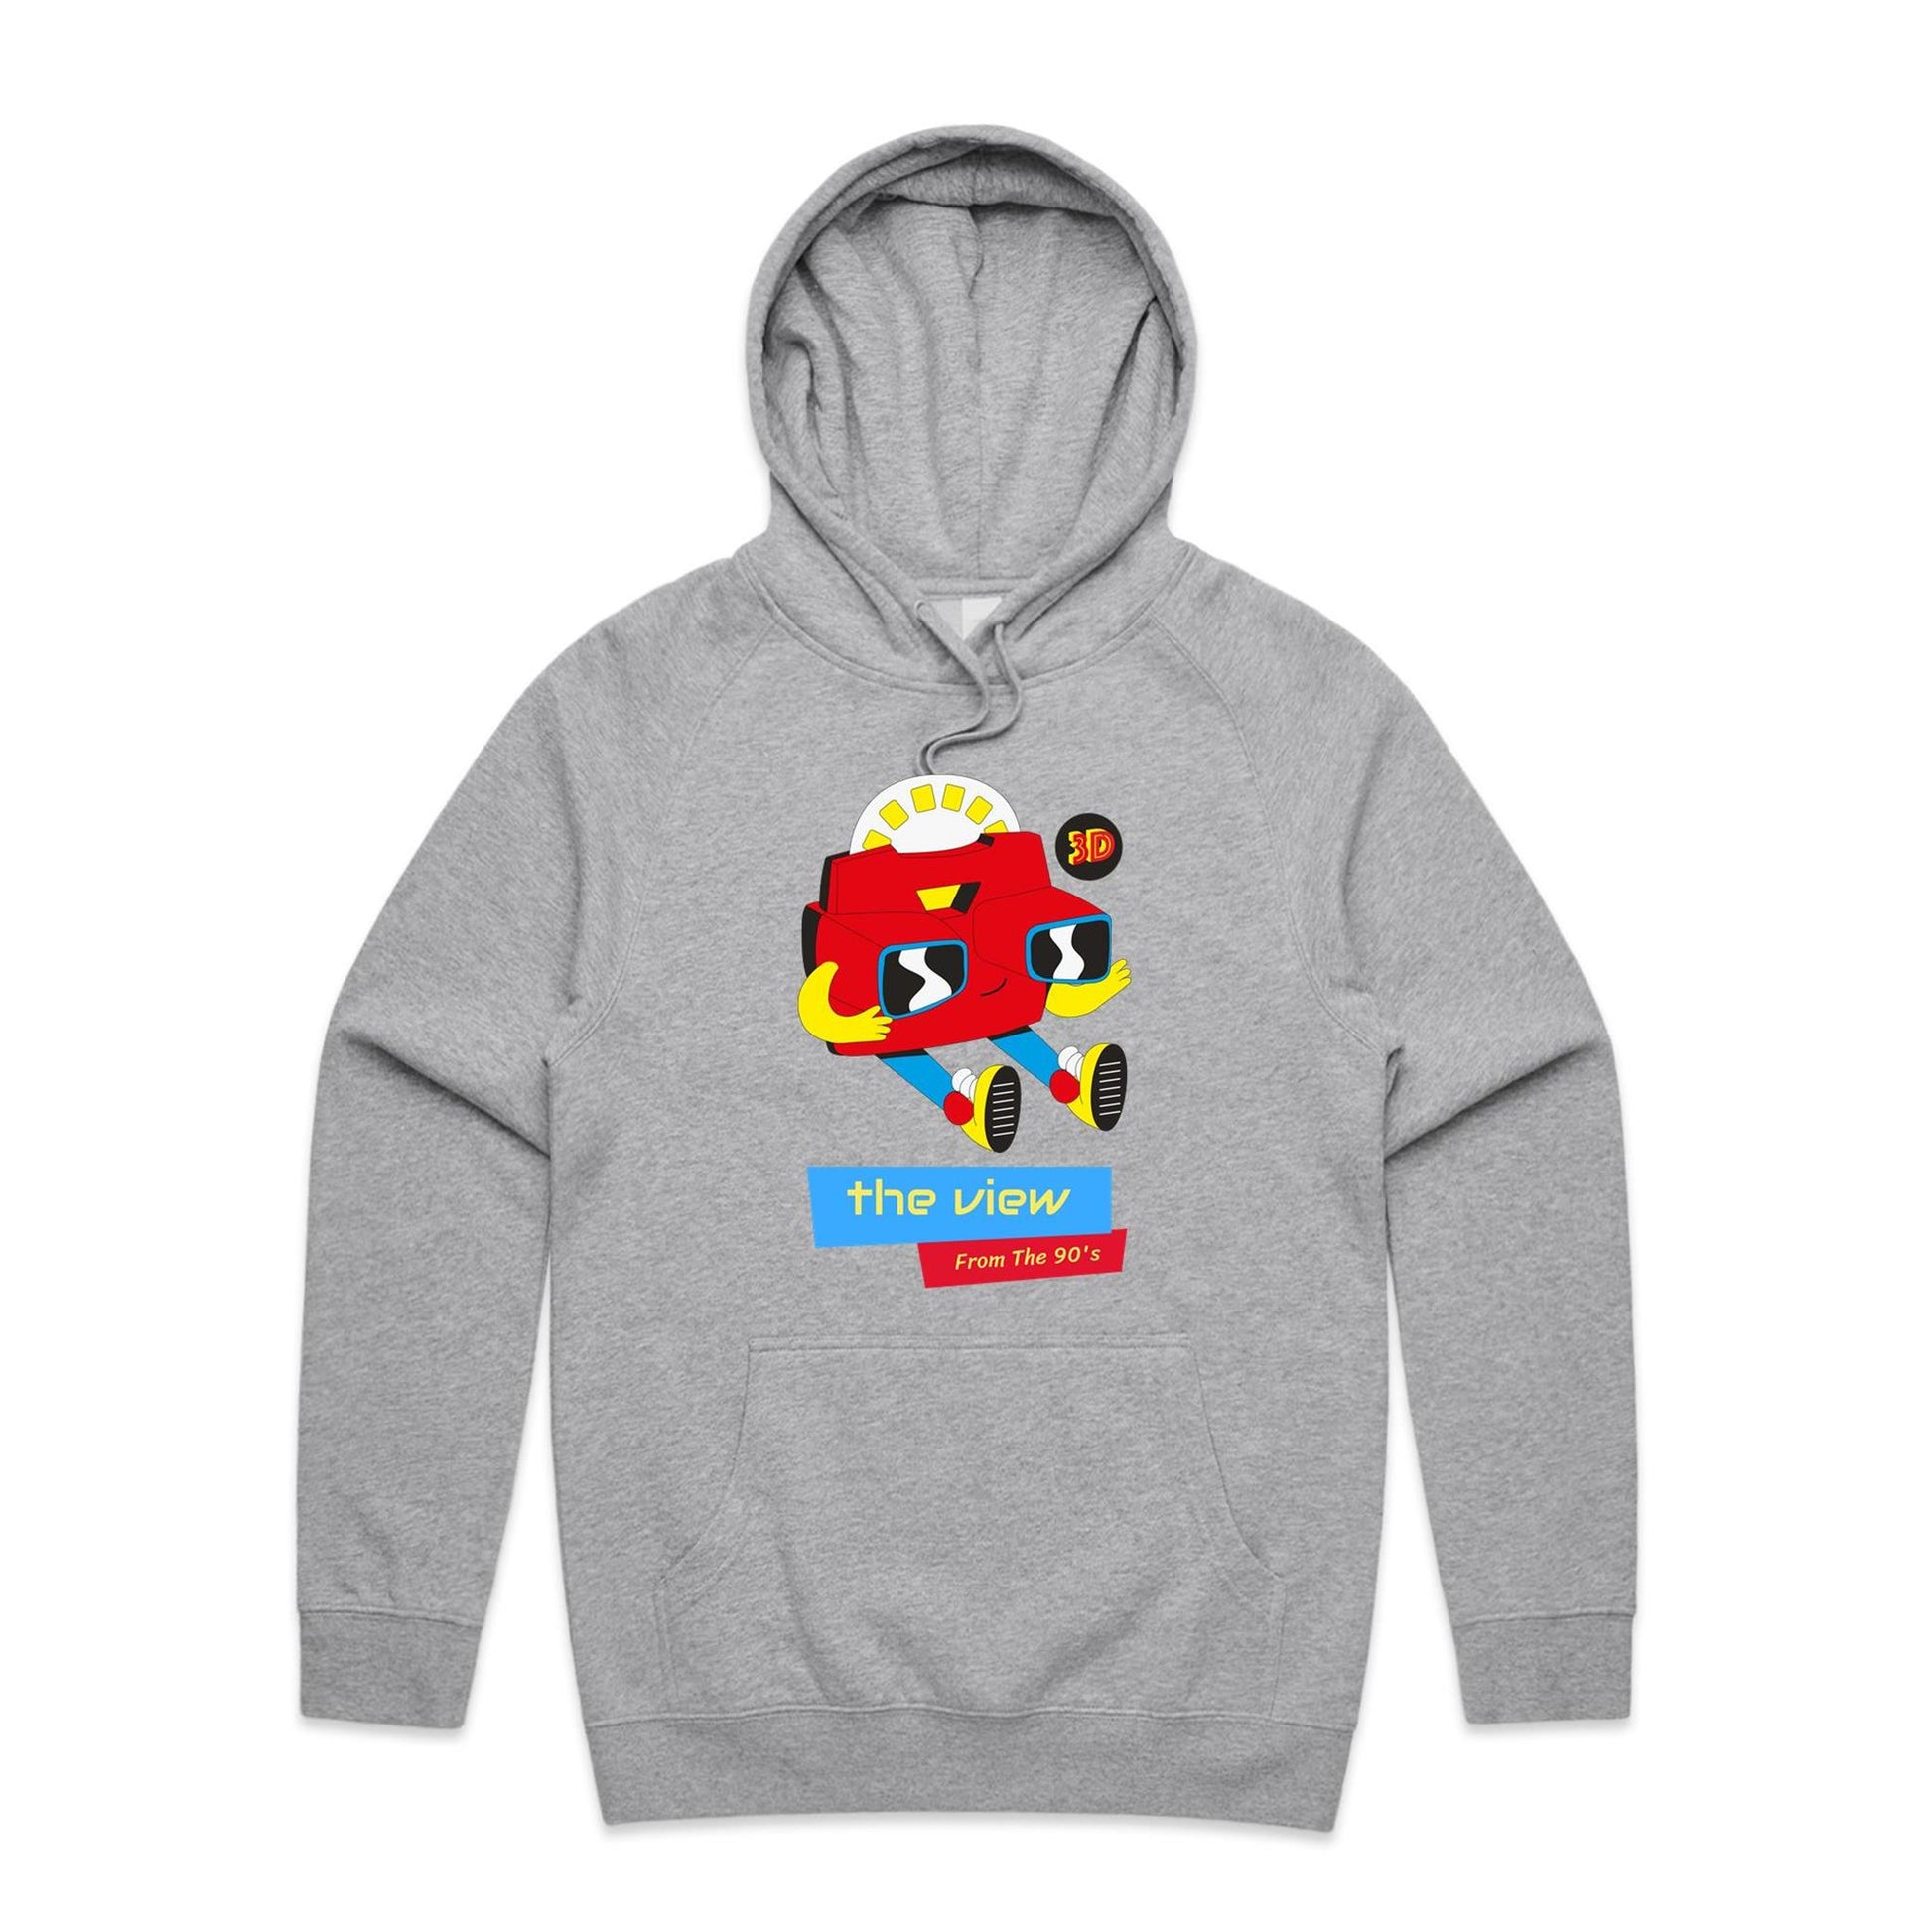 The View From The 90's - Supply Hood Grey Marle Mens Supply Hoodie Retro